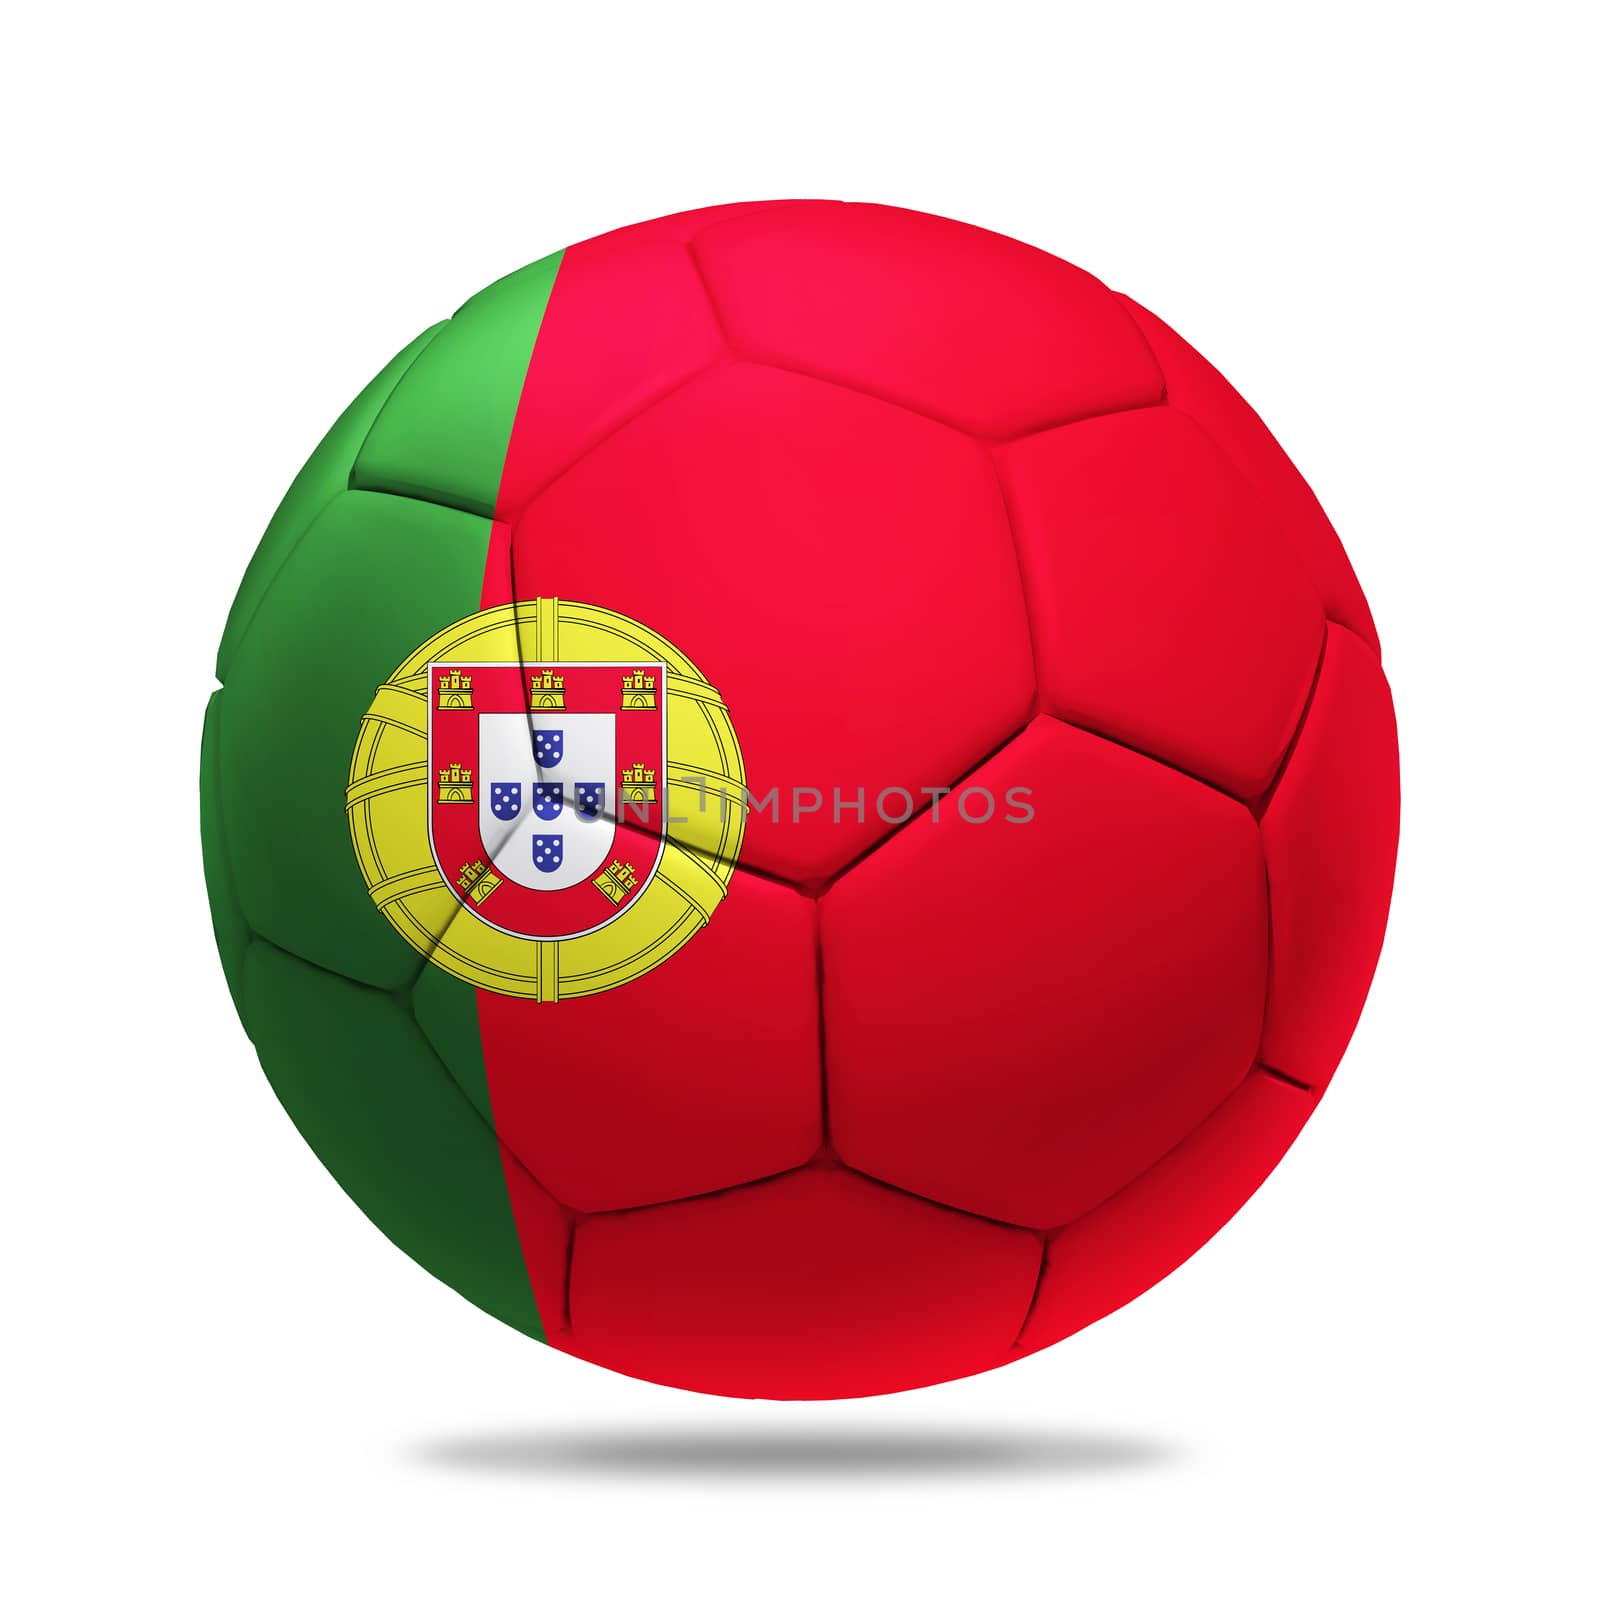 3D soccer ball with Portugal team flag, by koson